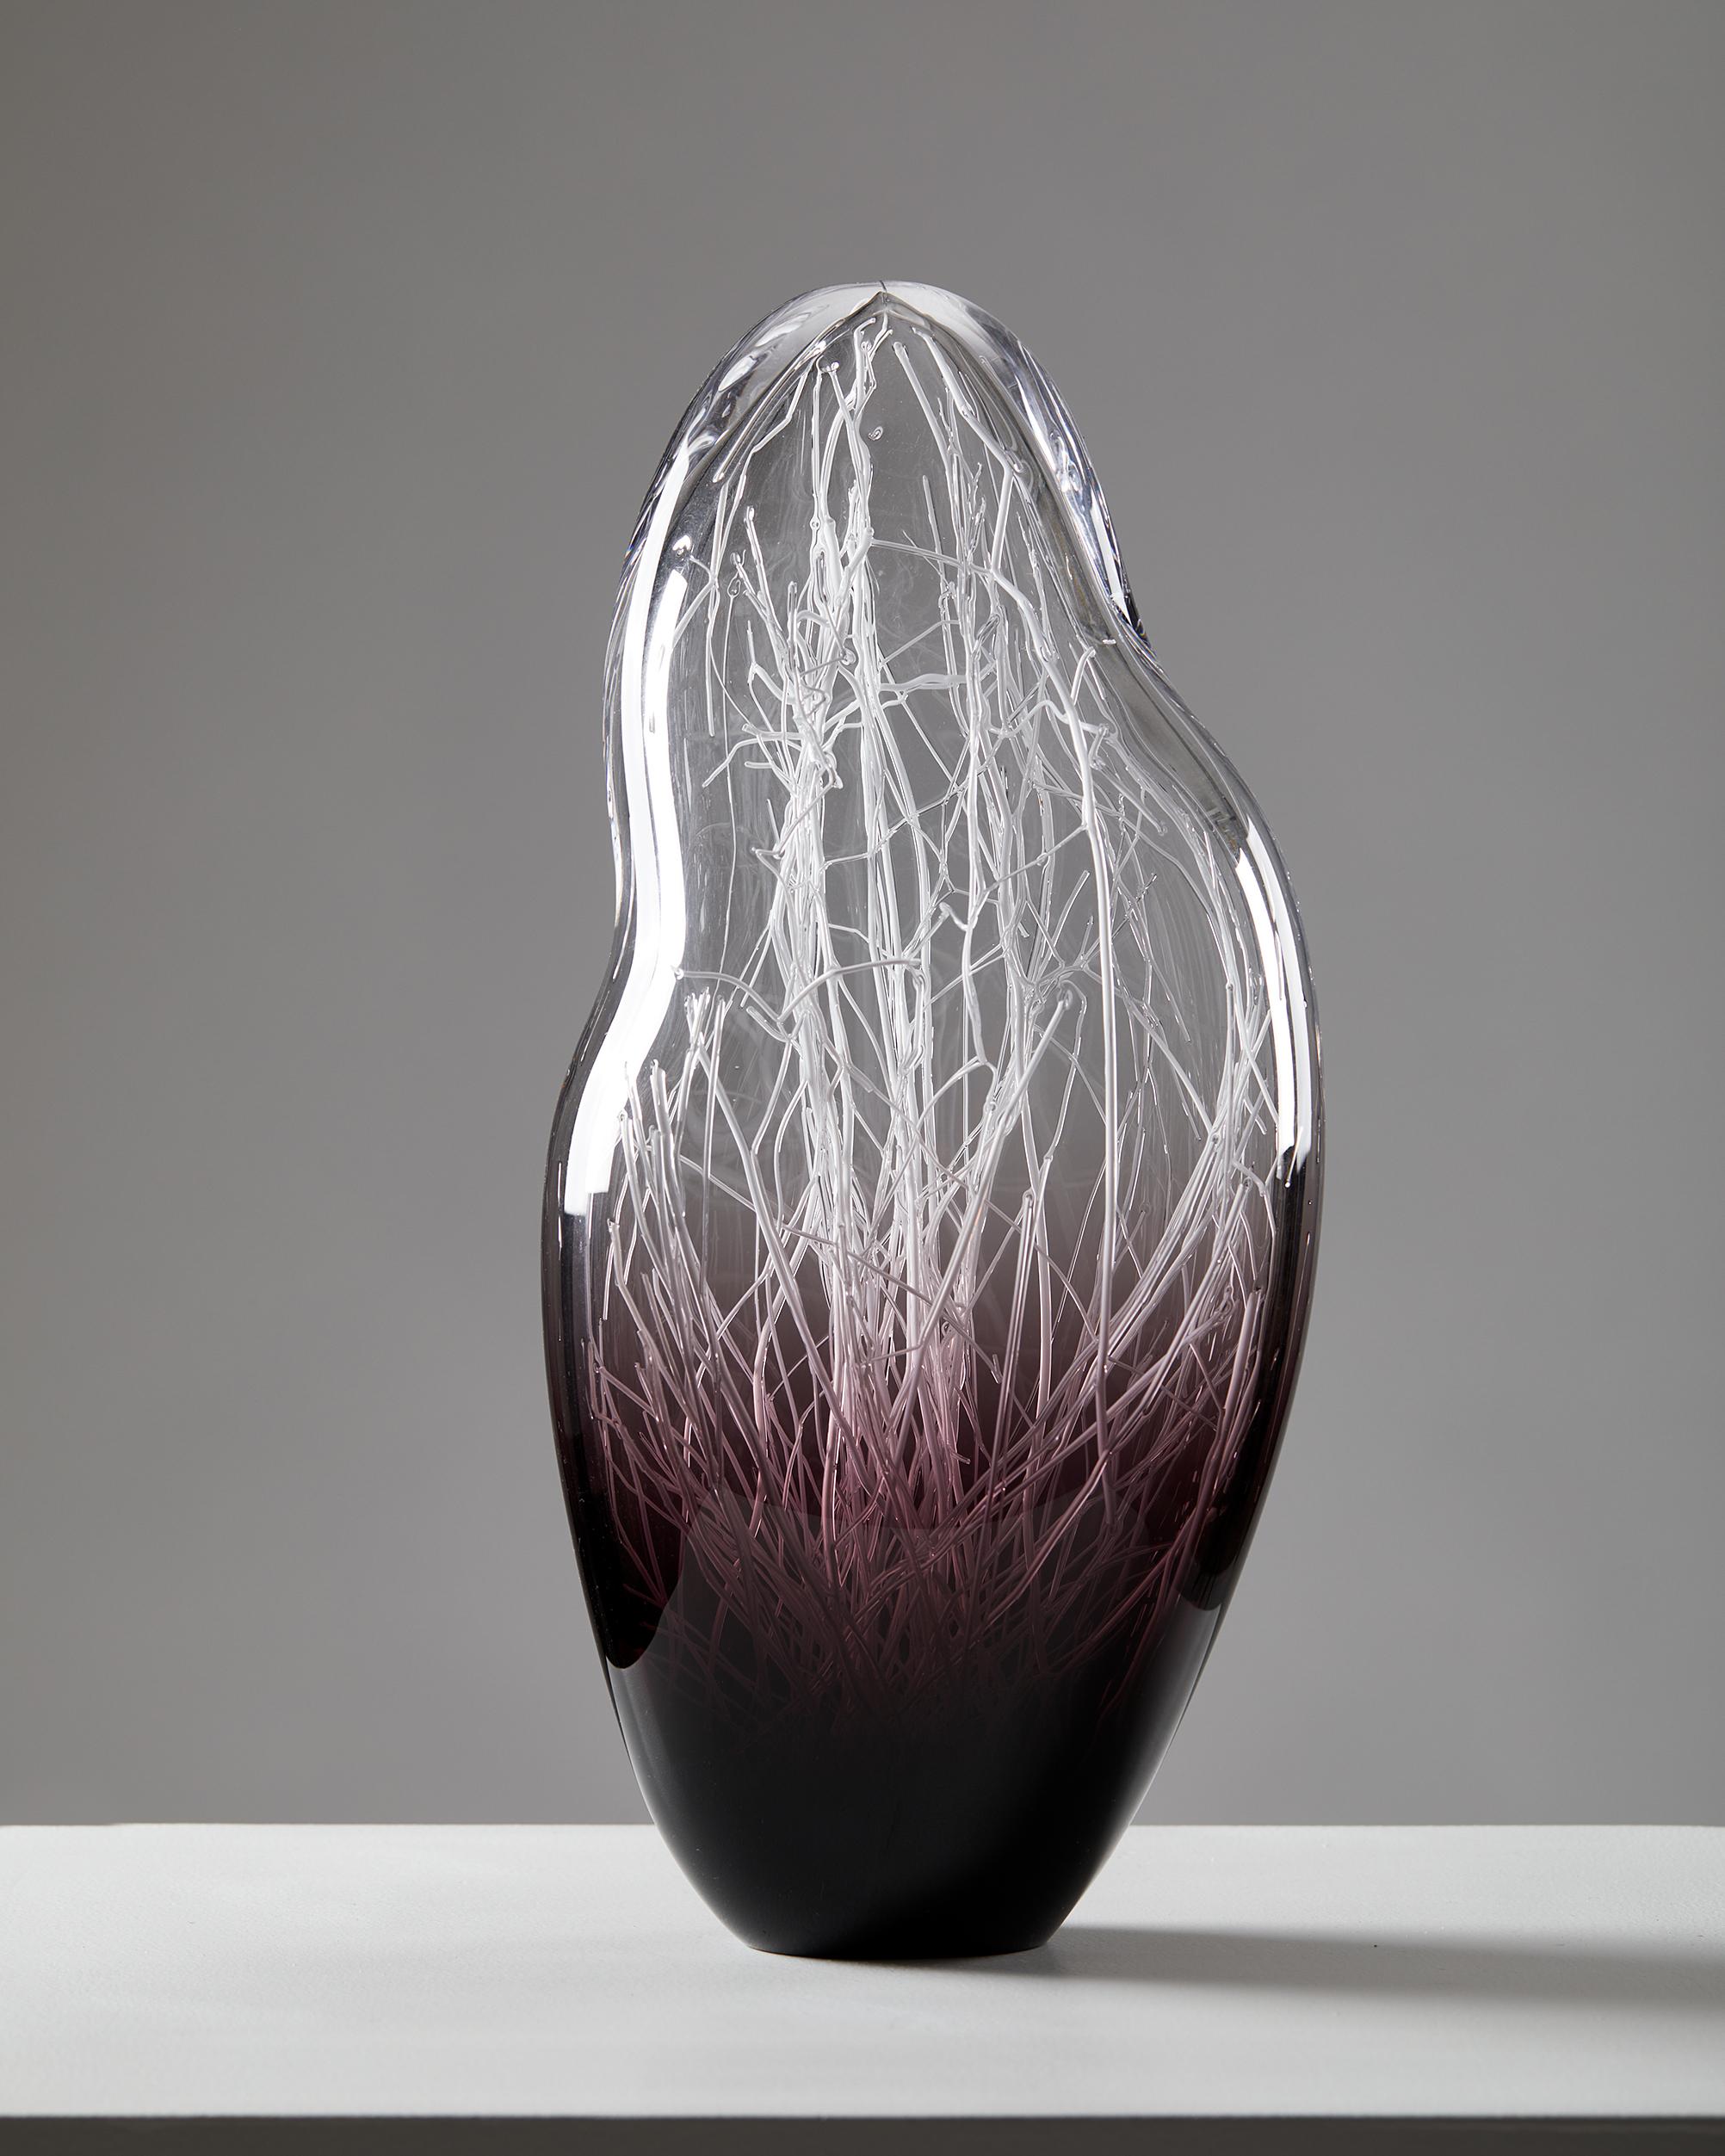 Danish Glass Sculpture “Penumbra” by Hanne Enemark and Louis Thompson